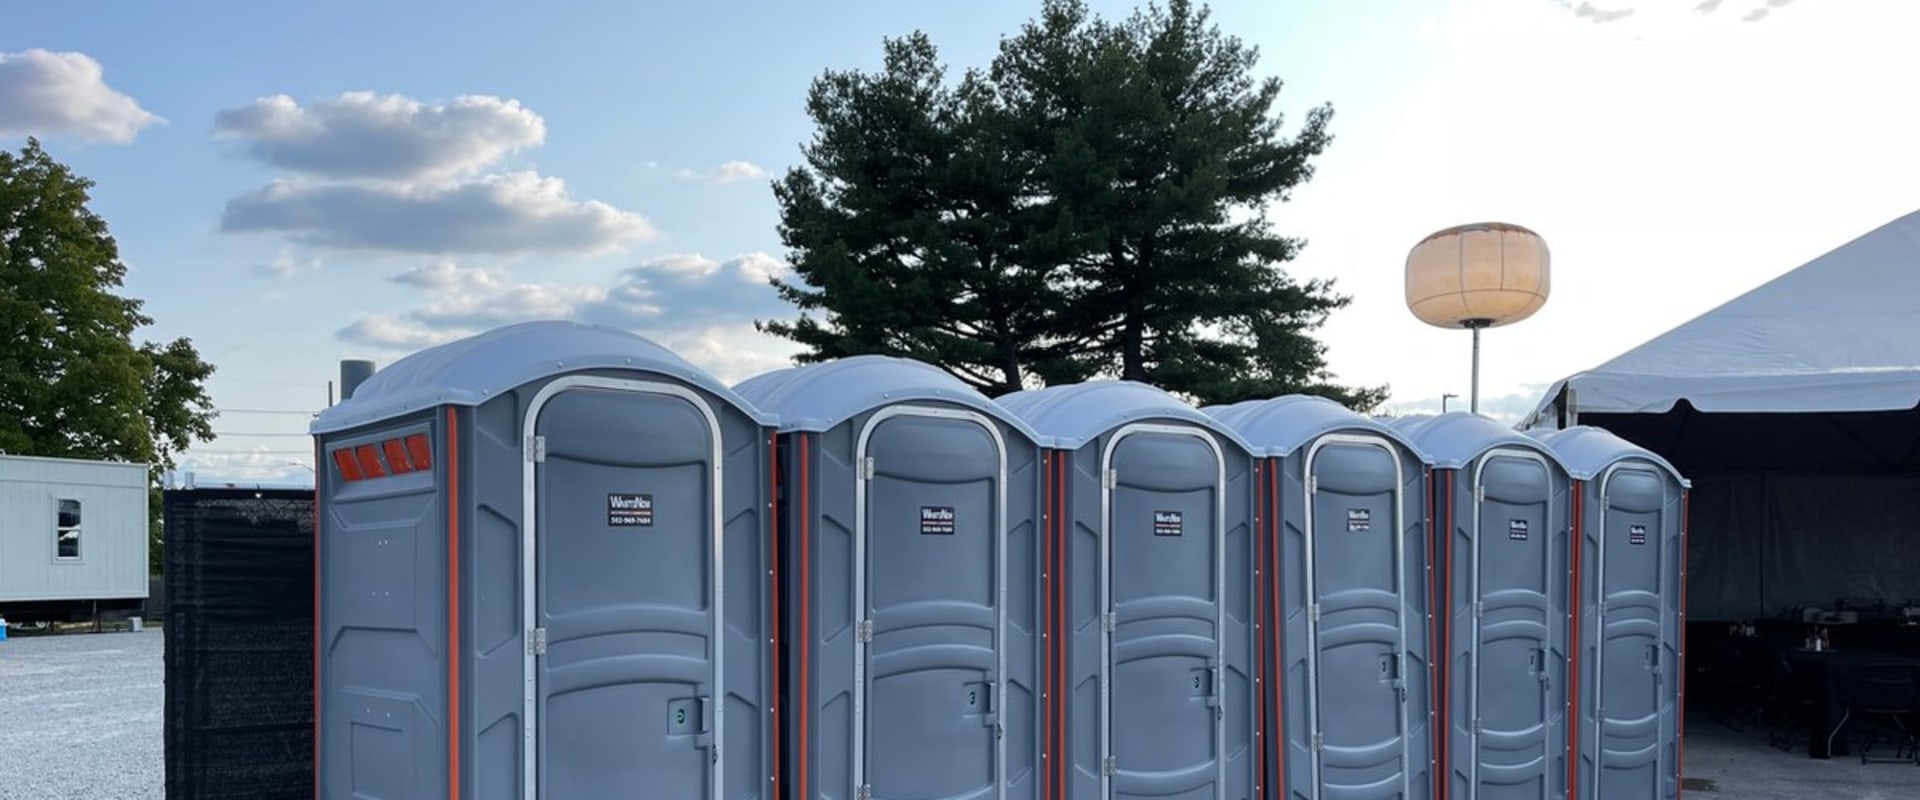 Concrete Repair In Louisville, KY: The Benefits Of Renting A Portable Restroom